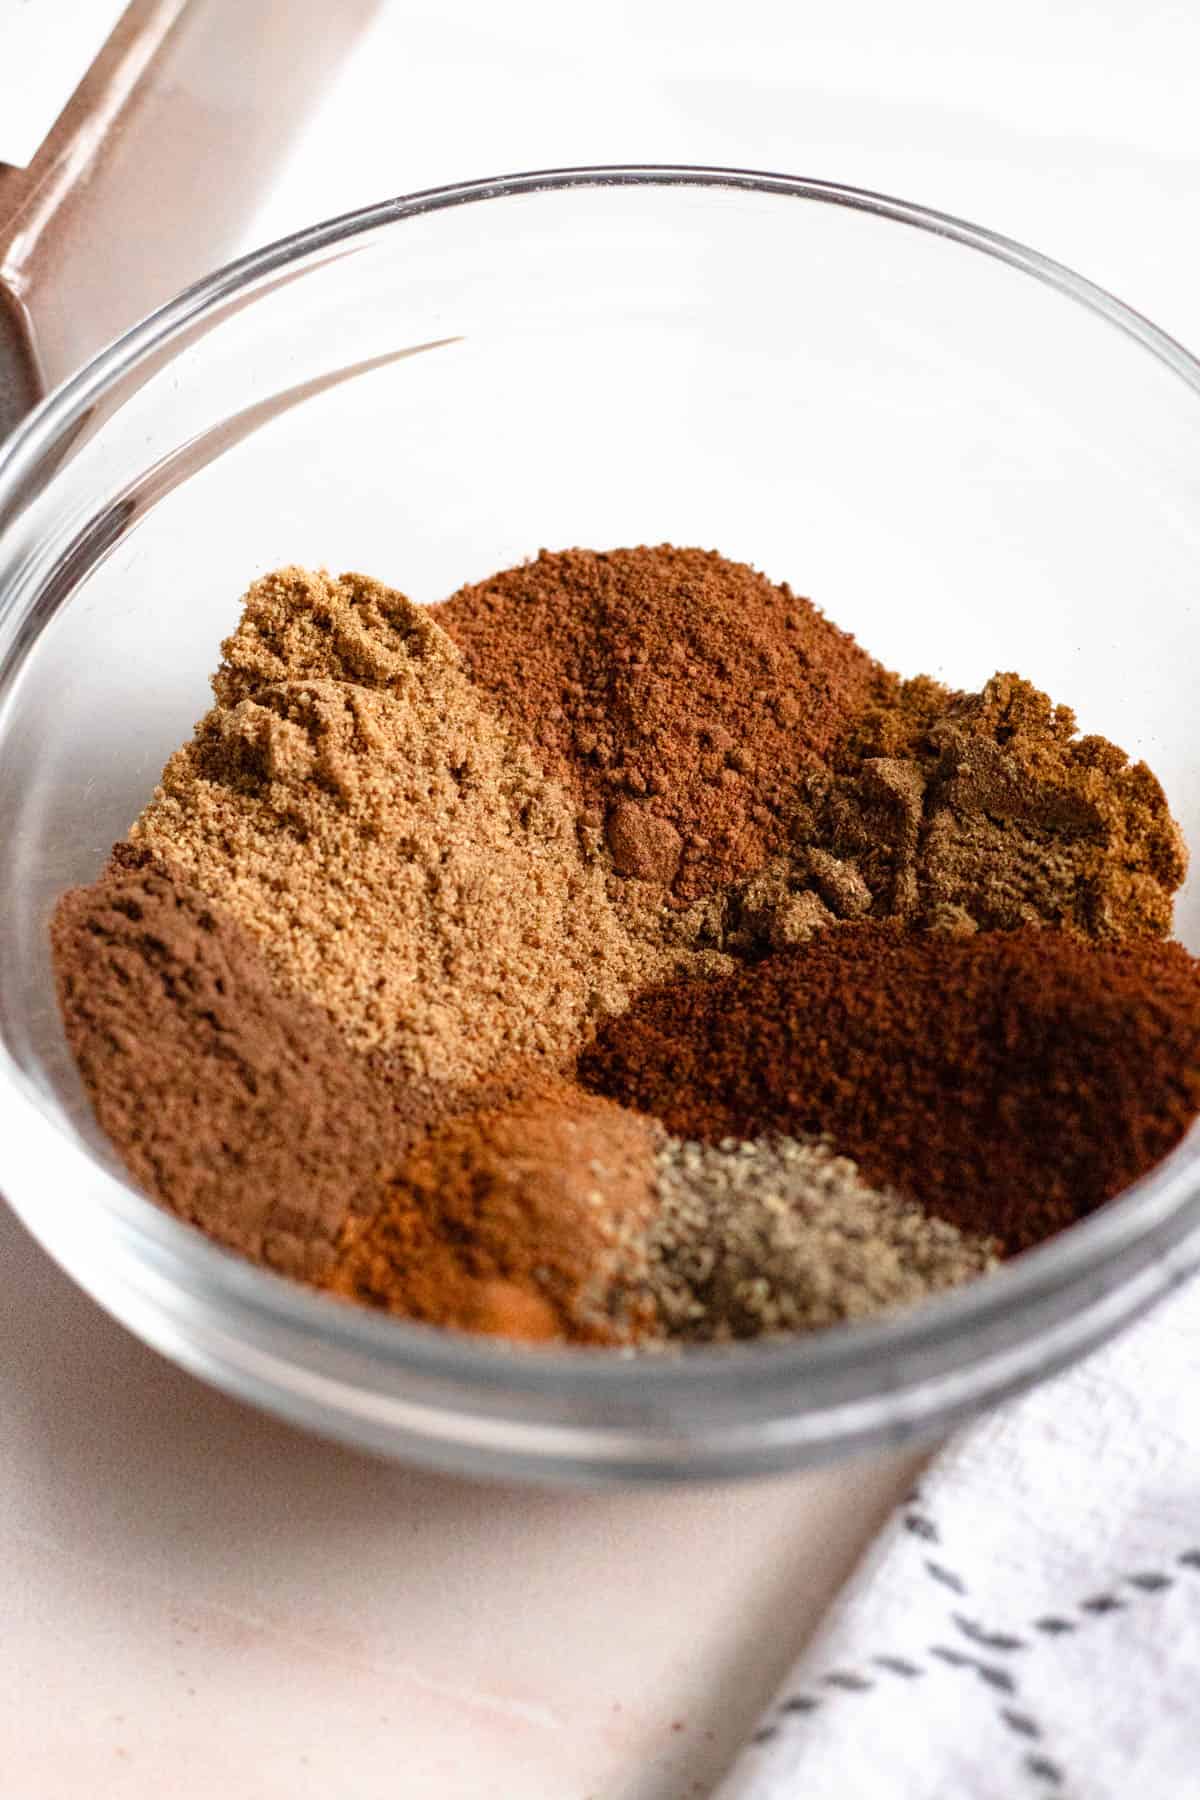 Ingredients for preparing Lebanese 7 Spice measured out and added to a glass measuring bowl. 